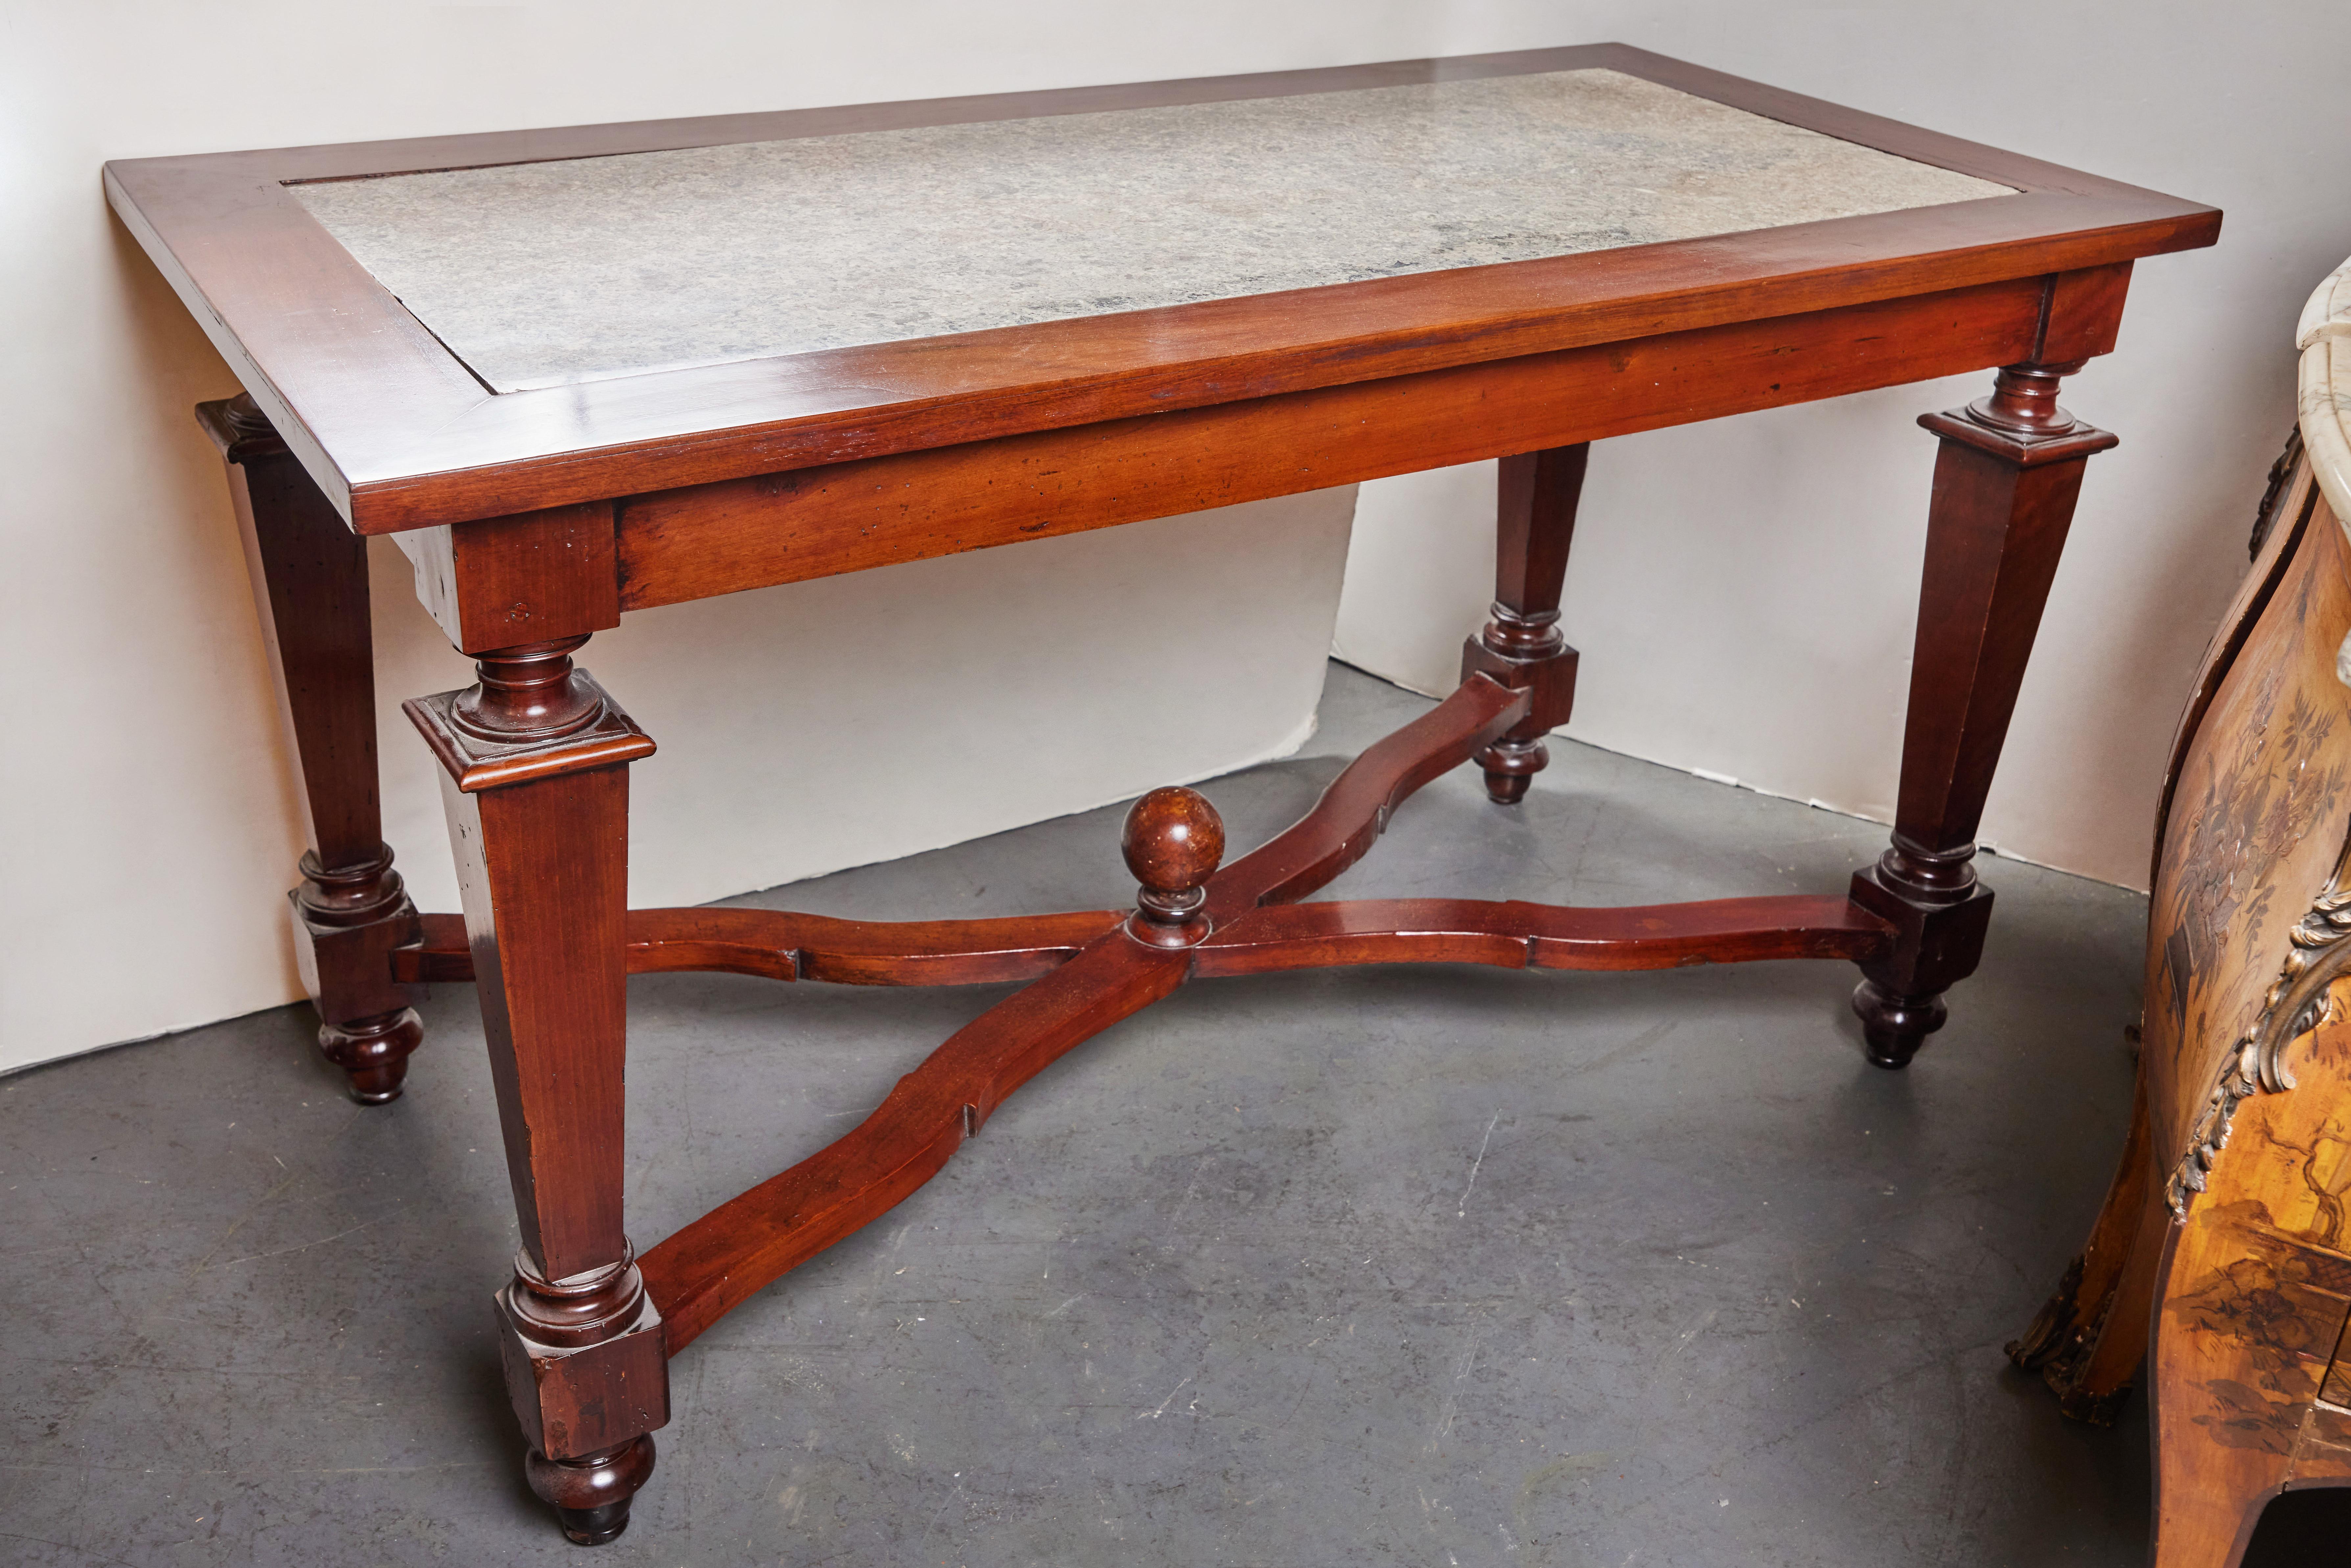 Italian c. 1780 Tuscan Console Table For Sale